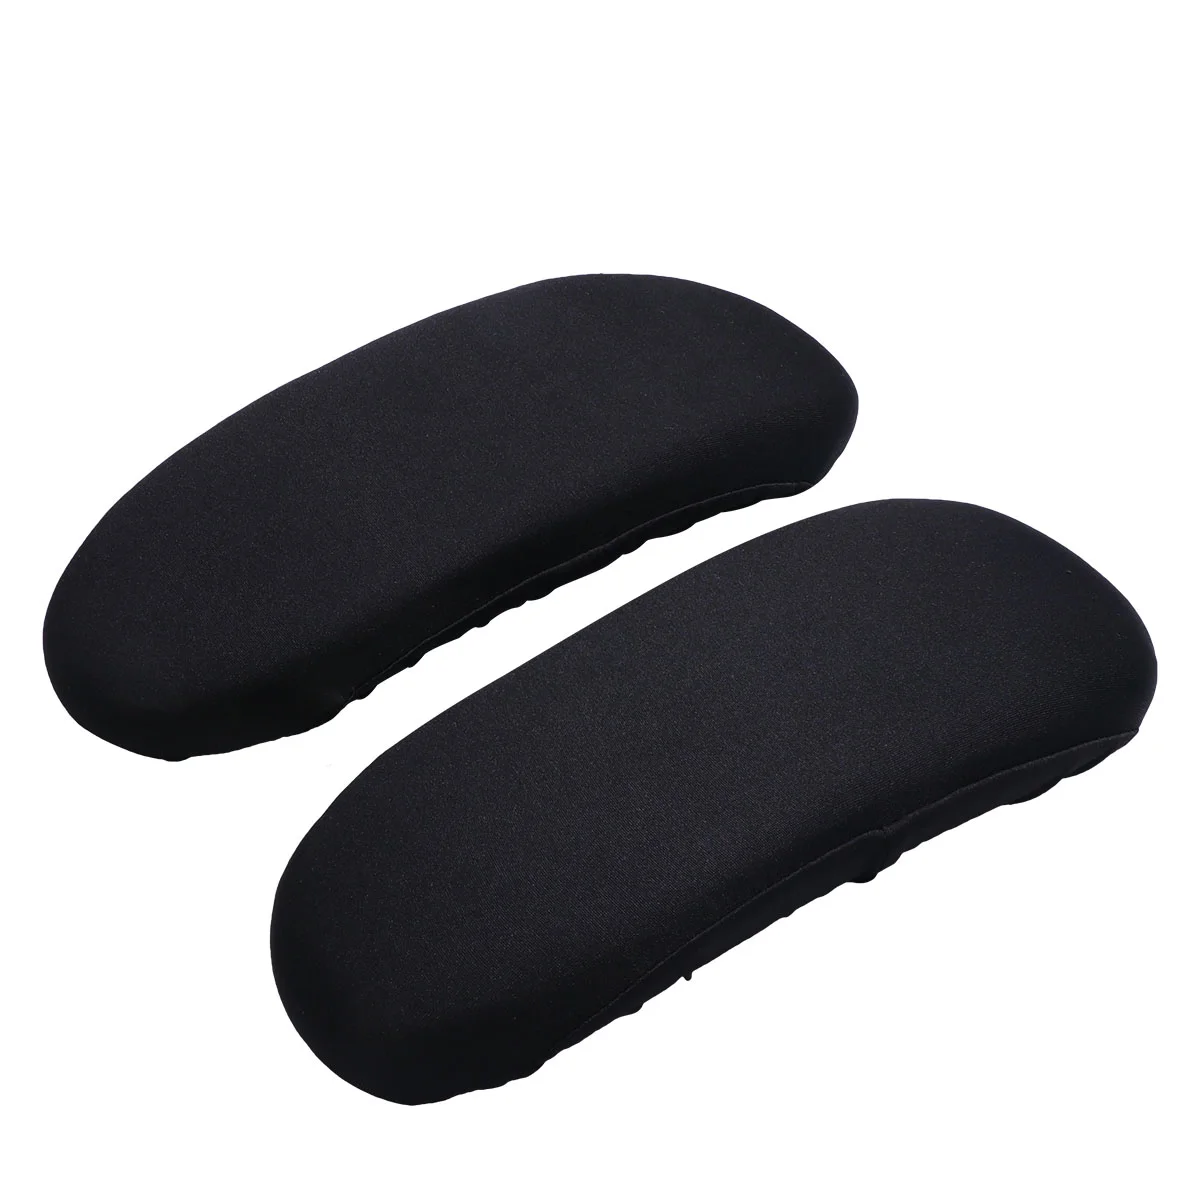 

Chair Armrest Covers Cover Office Arm Armchair Pad Pads Seat Desk Cushions Gaming Pillows Replacement Memory Chairs Cushion